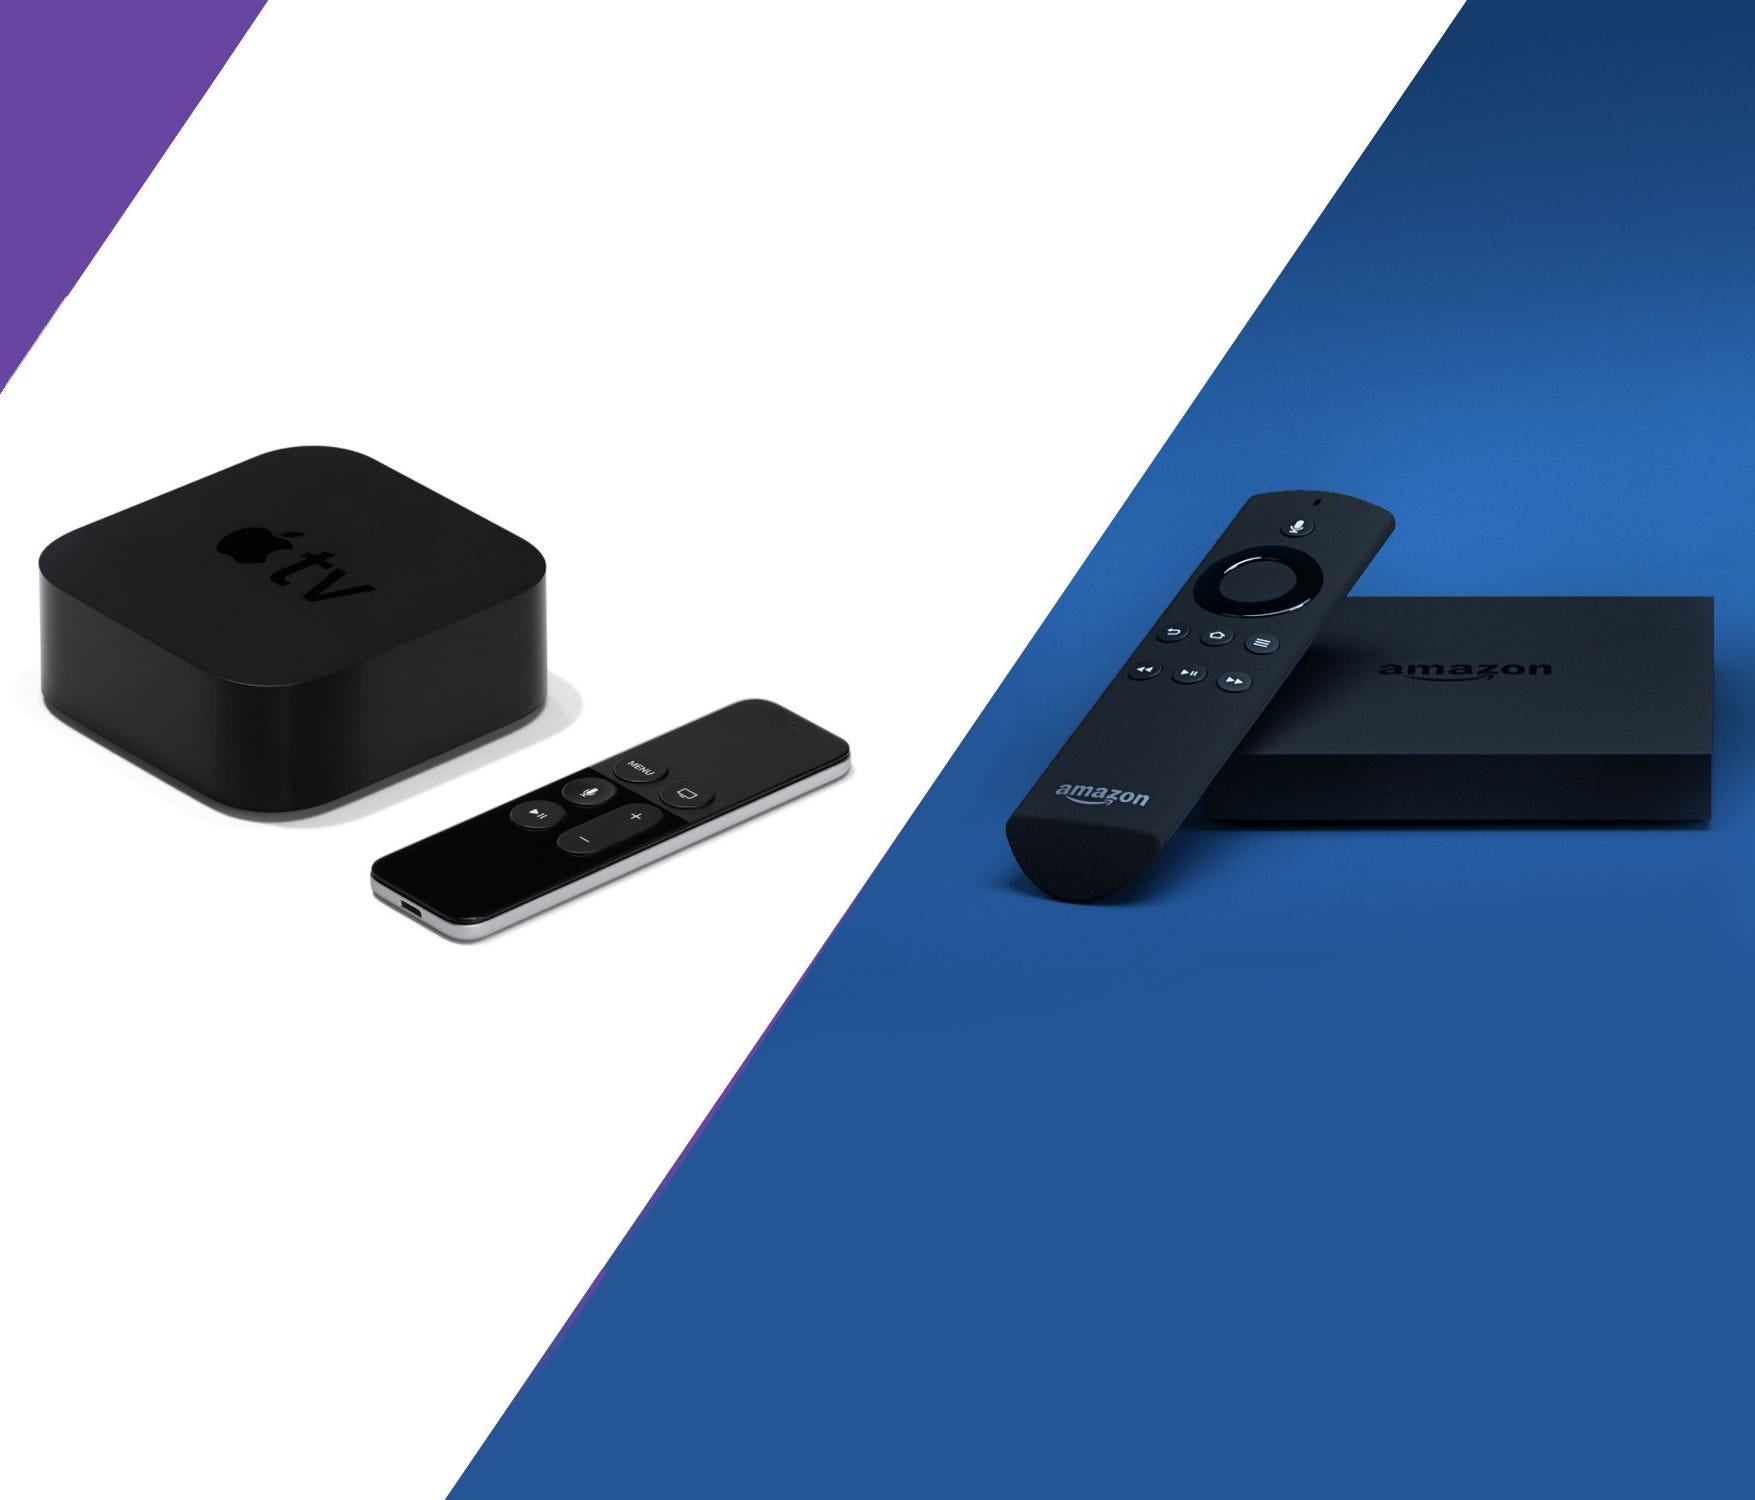 Let's help you figure out which streaming device is right for you.